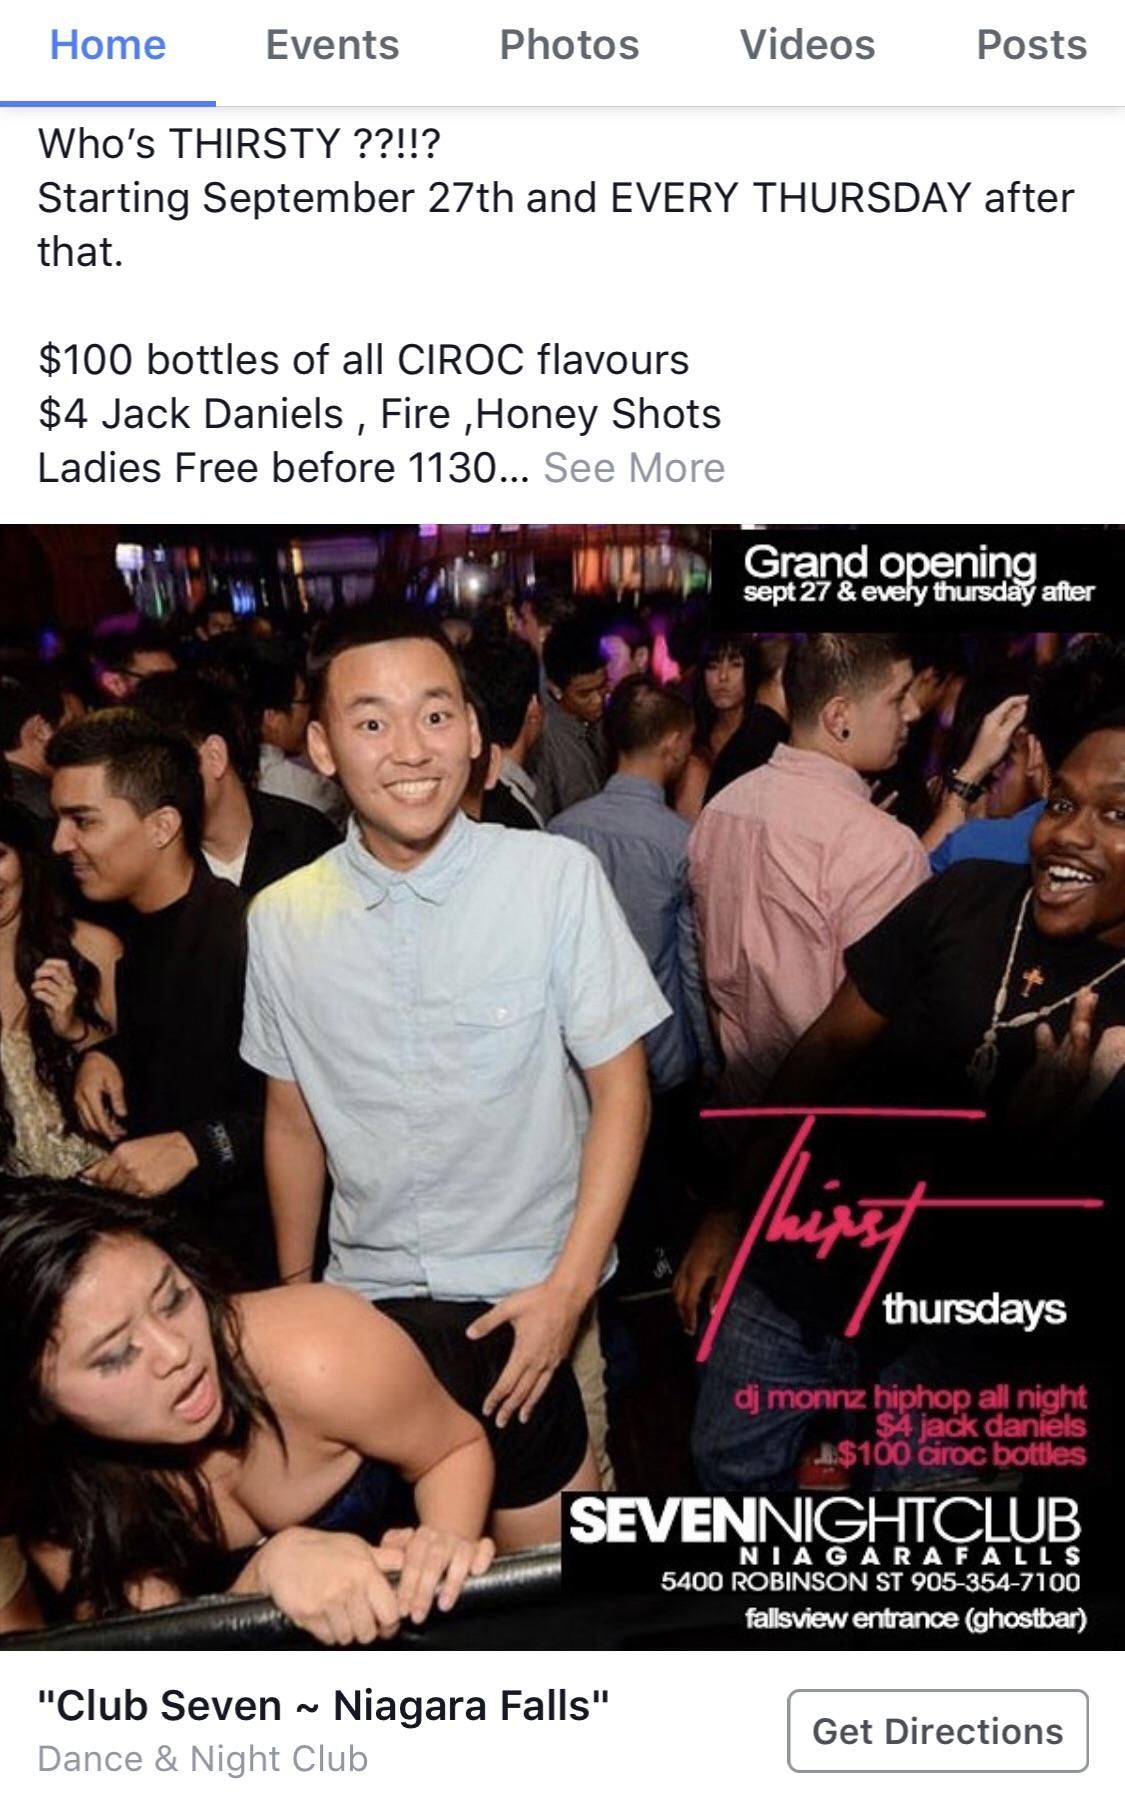 The picture this club chose to use as an advertisement on Facebook